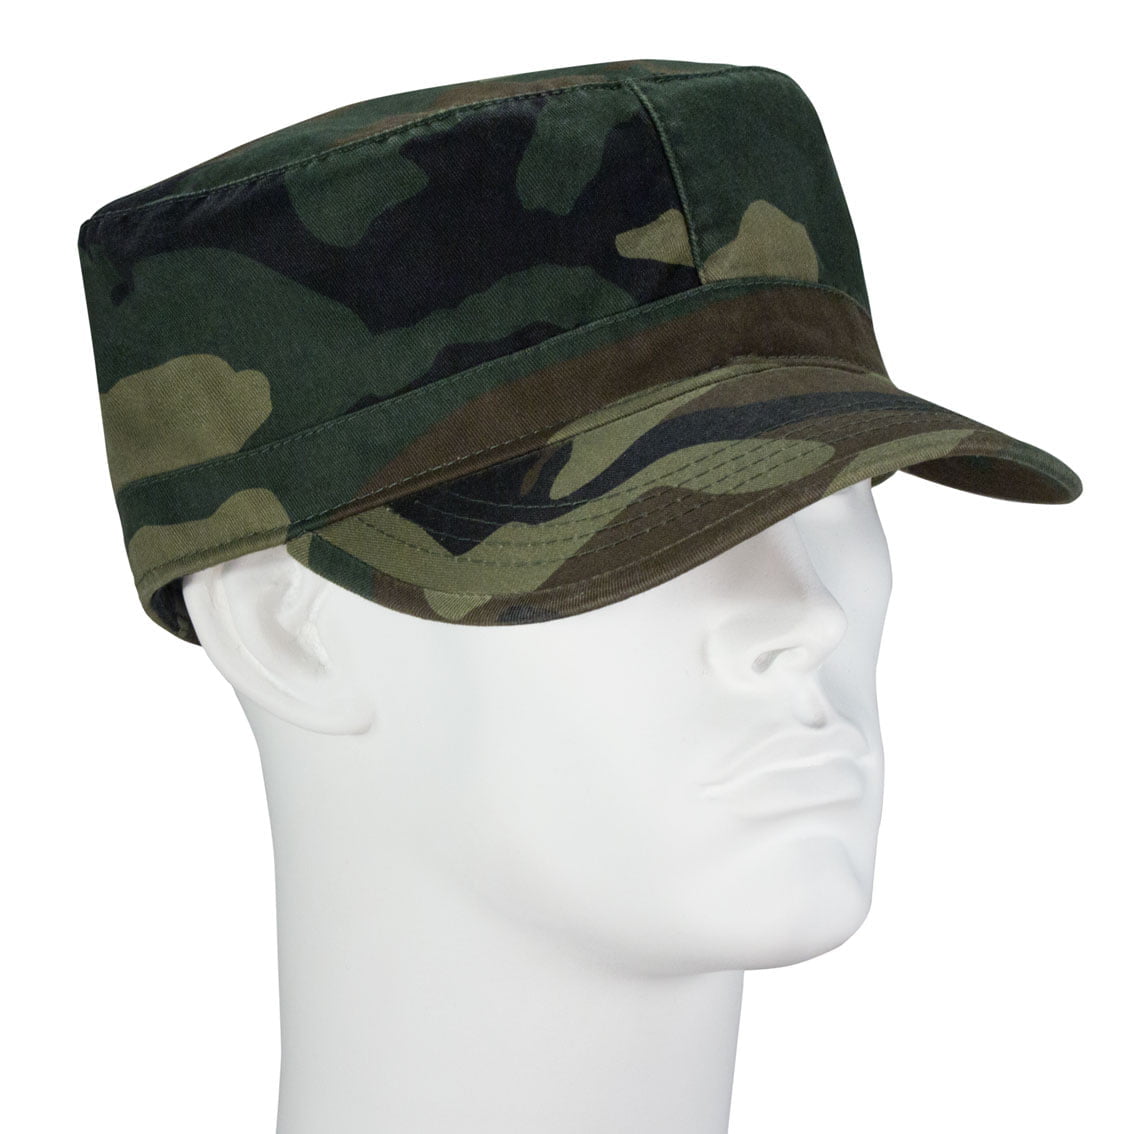 1pc Woodland Camo Castro Military Fatigue Army Hat - Fitted - Unconstructed - 100% Cotton